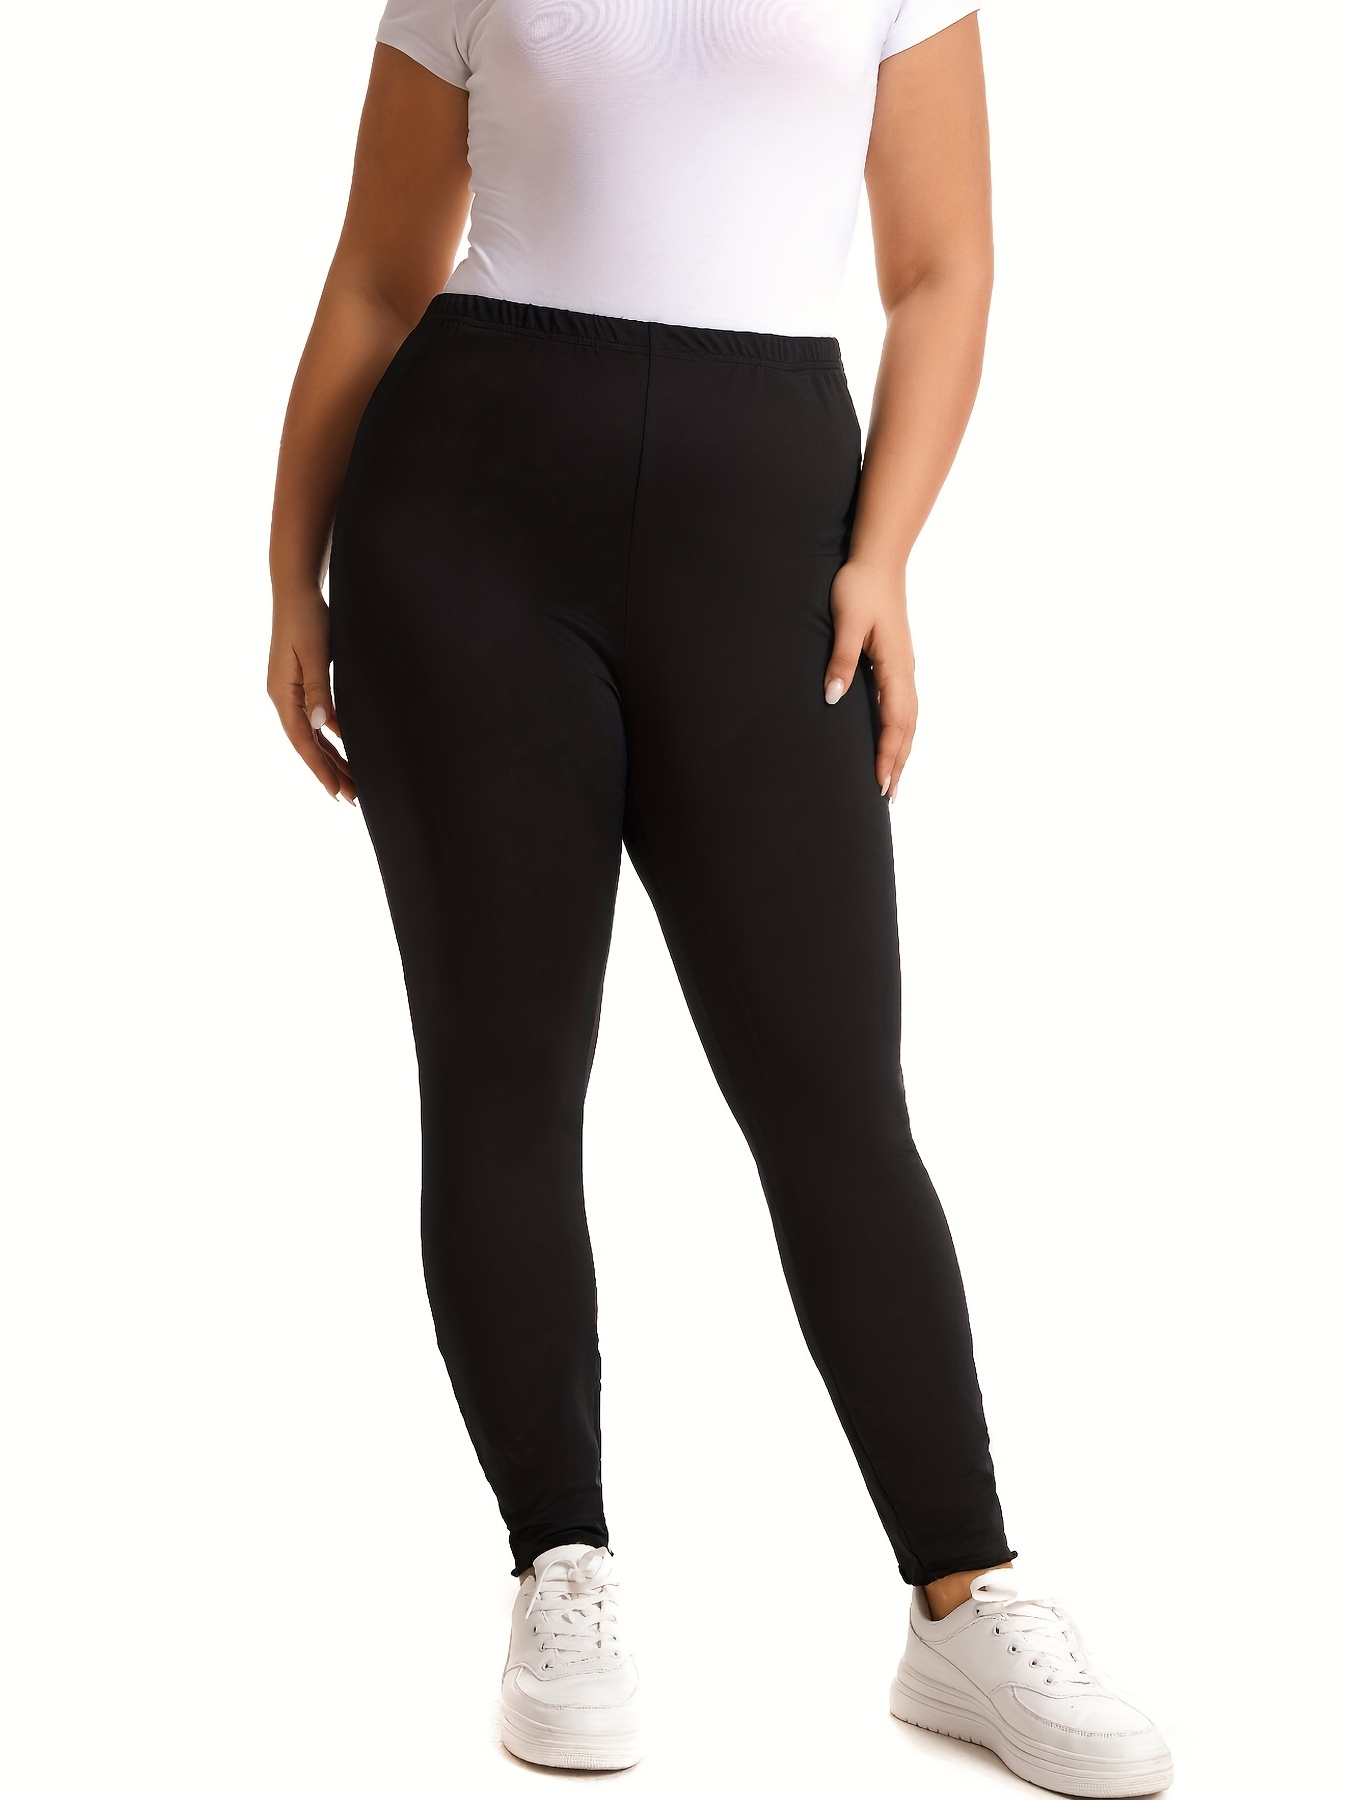 Plus Size Basic Leggings, Women's Plus Solid Wide Waistband High * Stretchy  Slim Fit Leggings